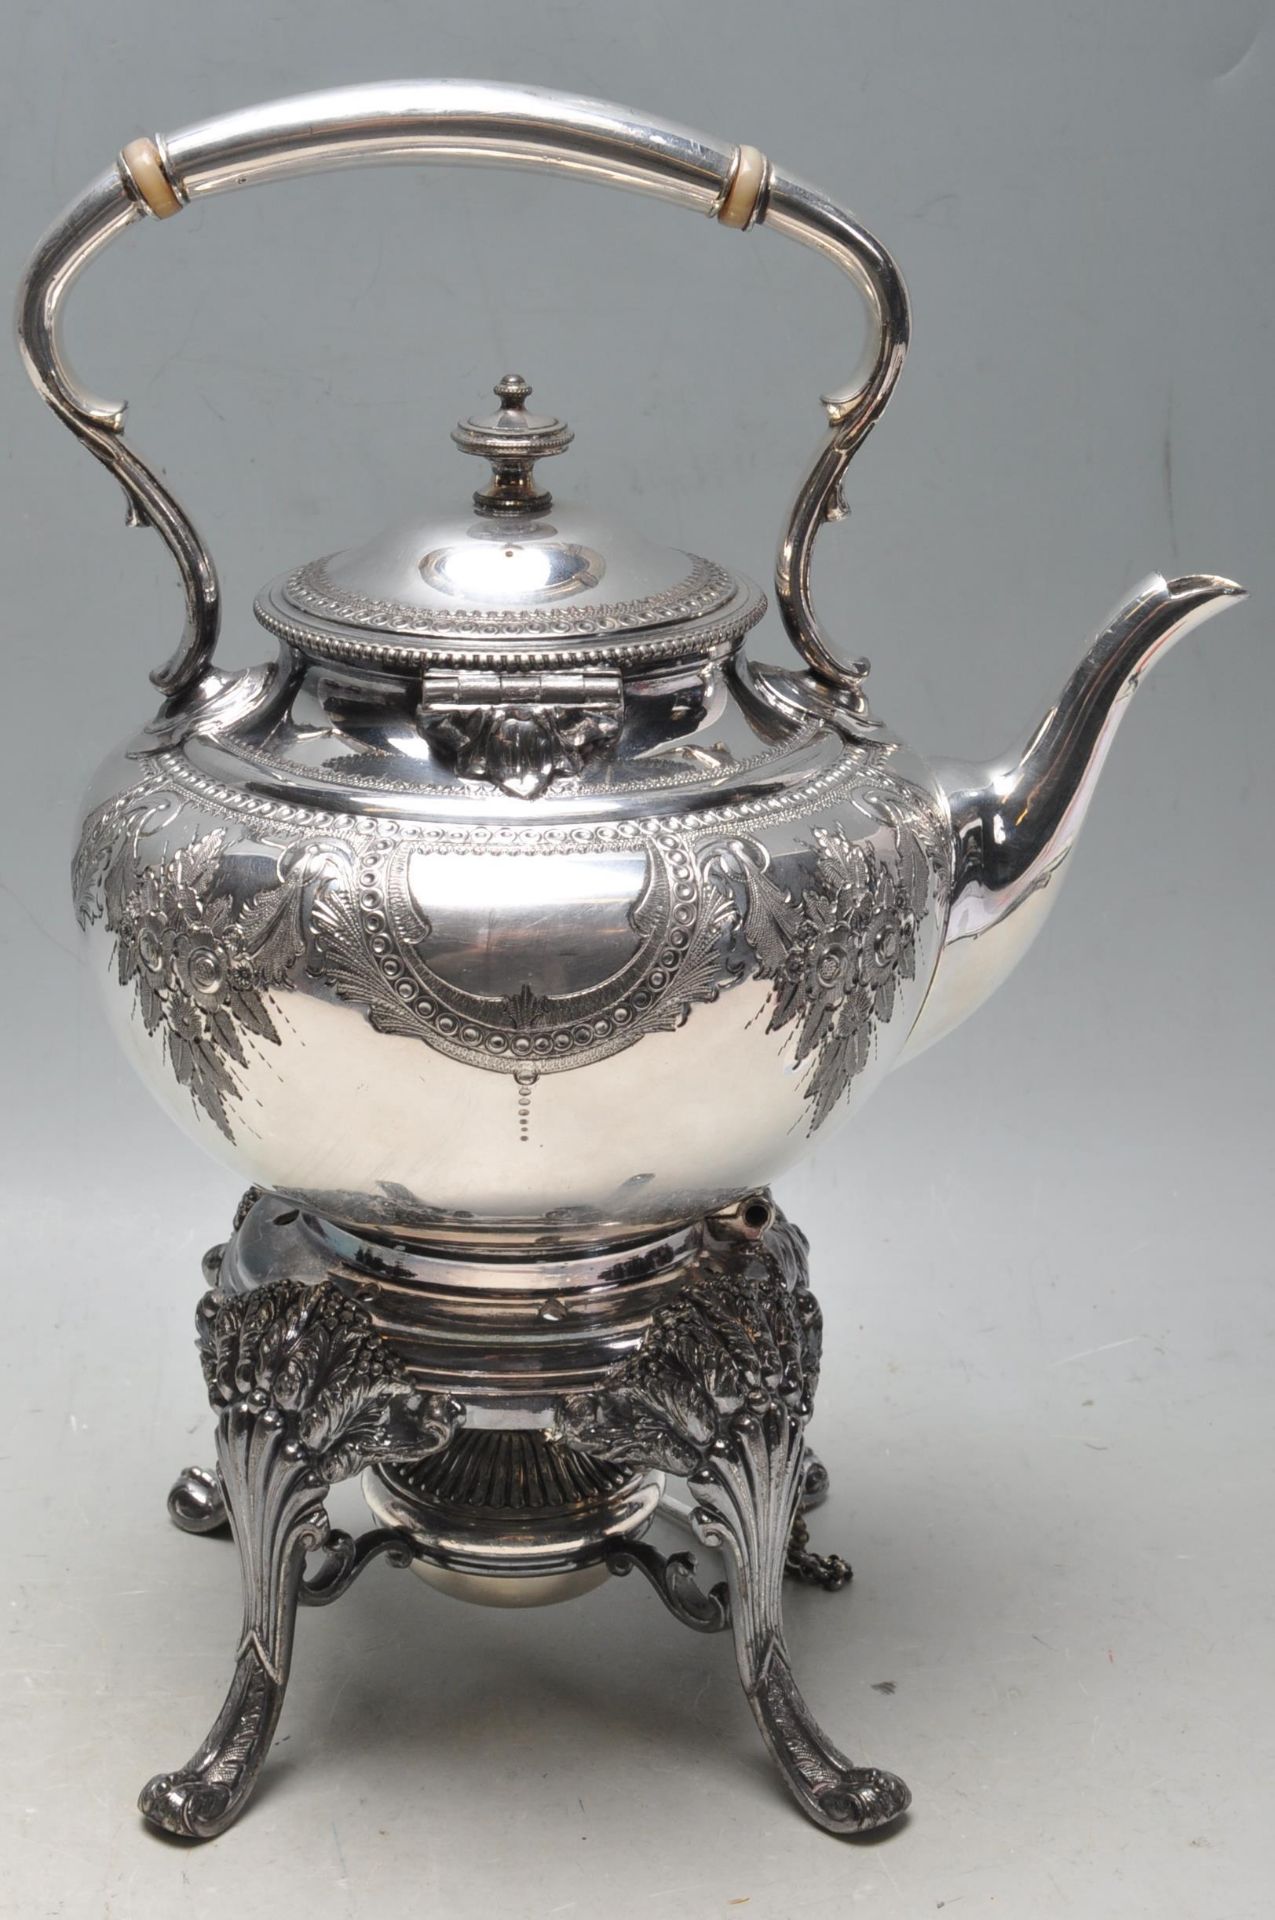 20TH CENTURY SILVER PLATE SPIRIT KETTLE BY JAMES DEAKIN & SONS - Image 6 of 8